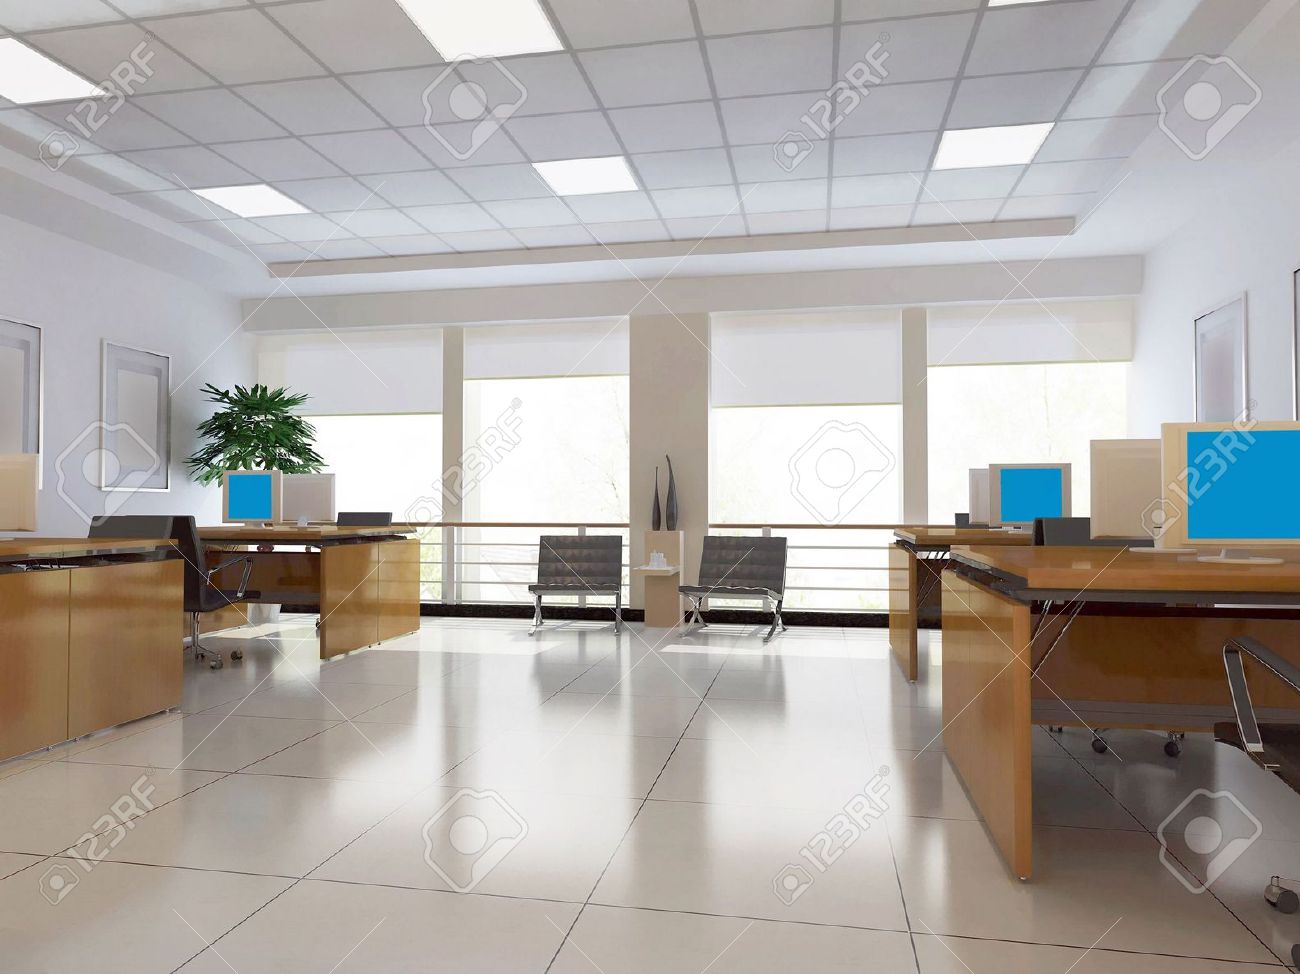 Office Office Room Modern On With Amazing Of Top An Nobody D Render Stock 5518 0 Office Room